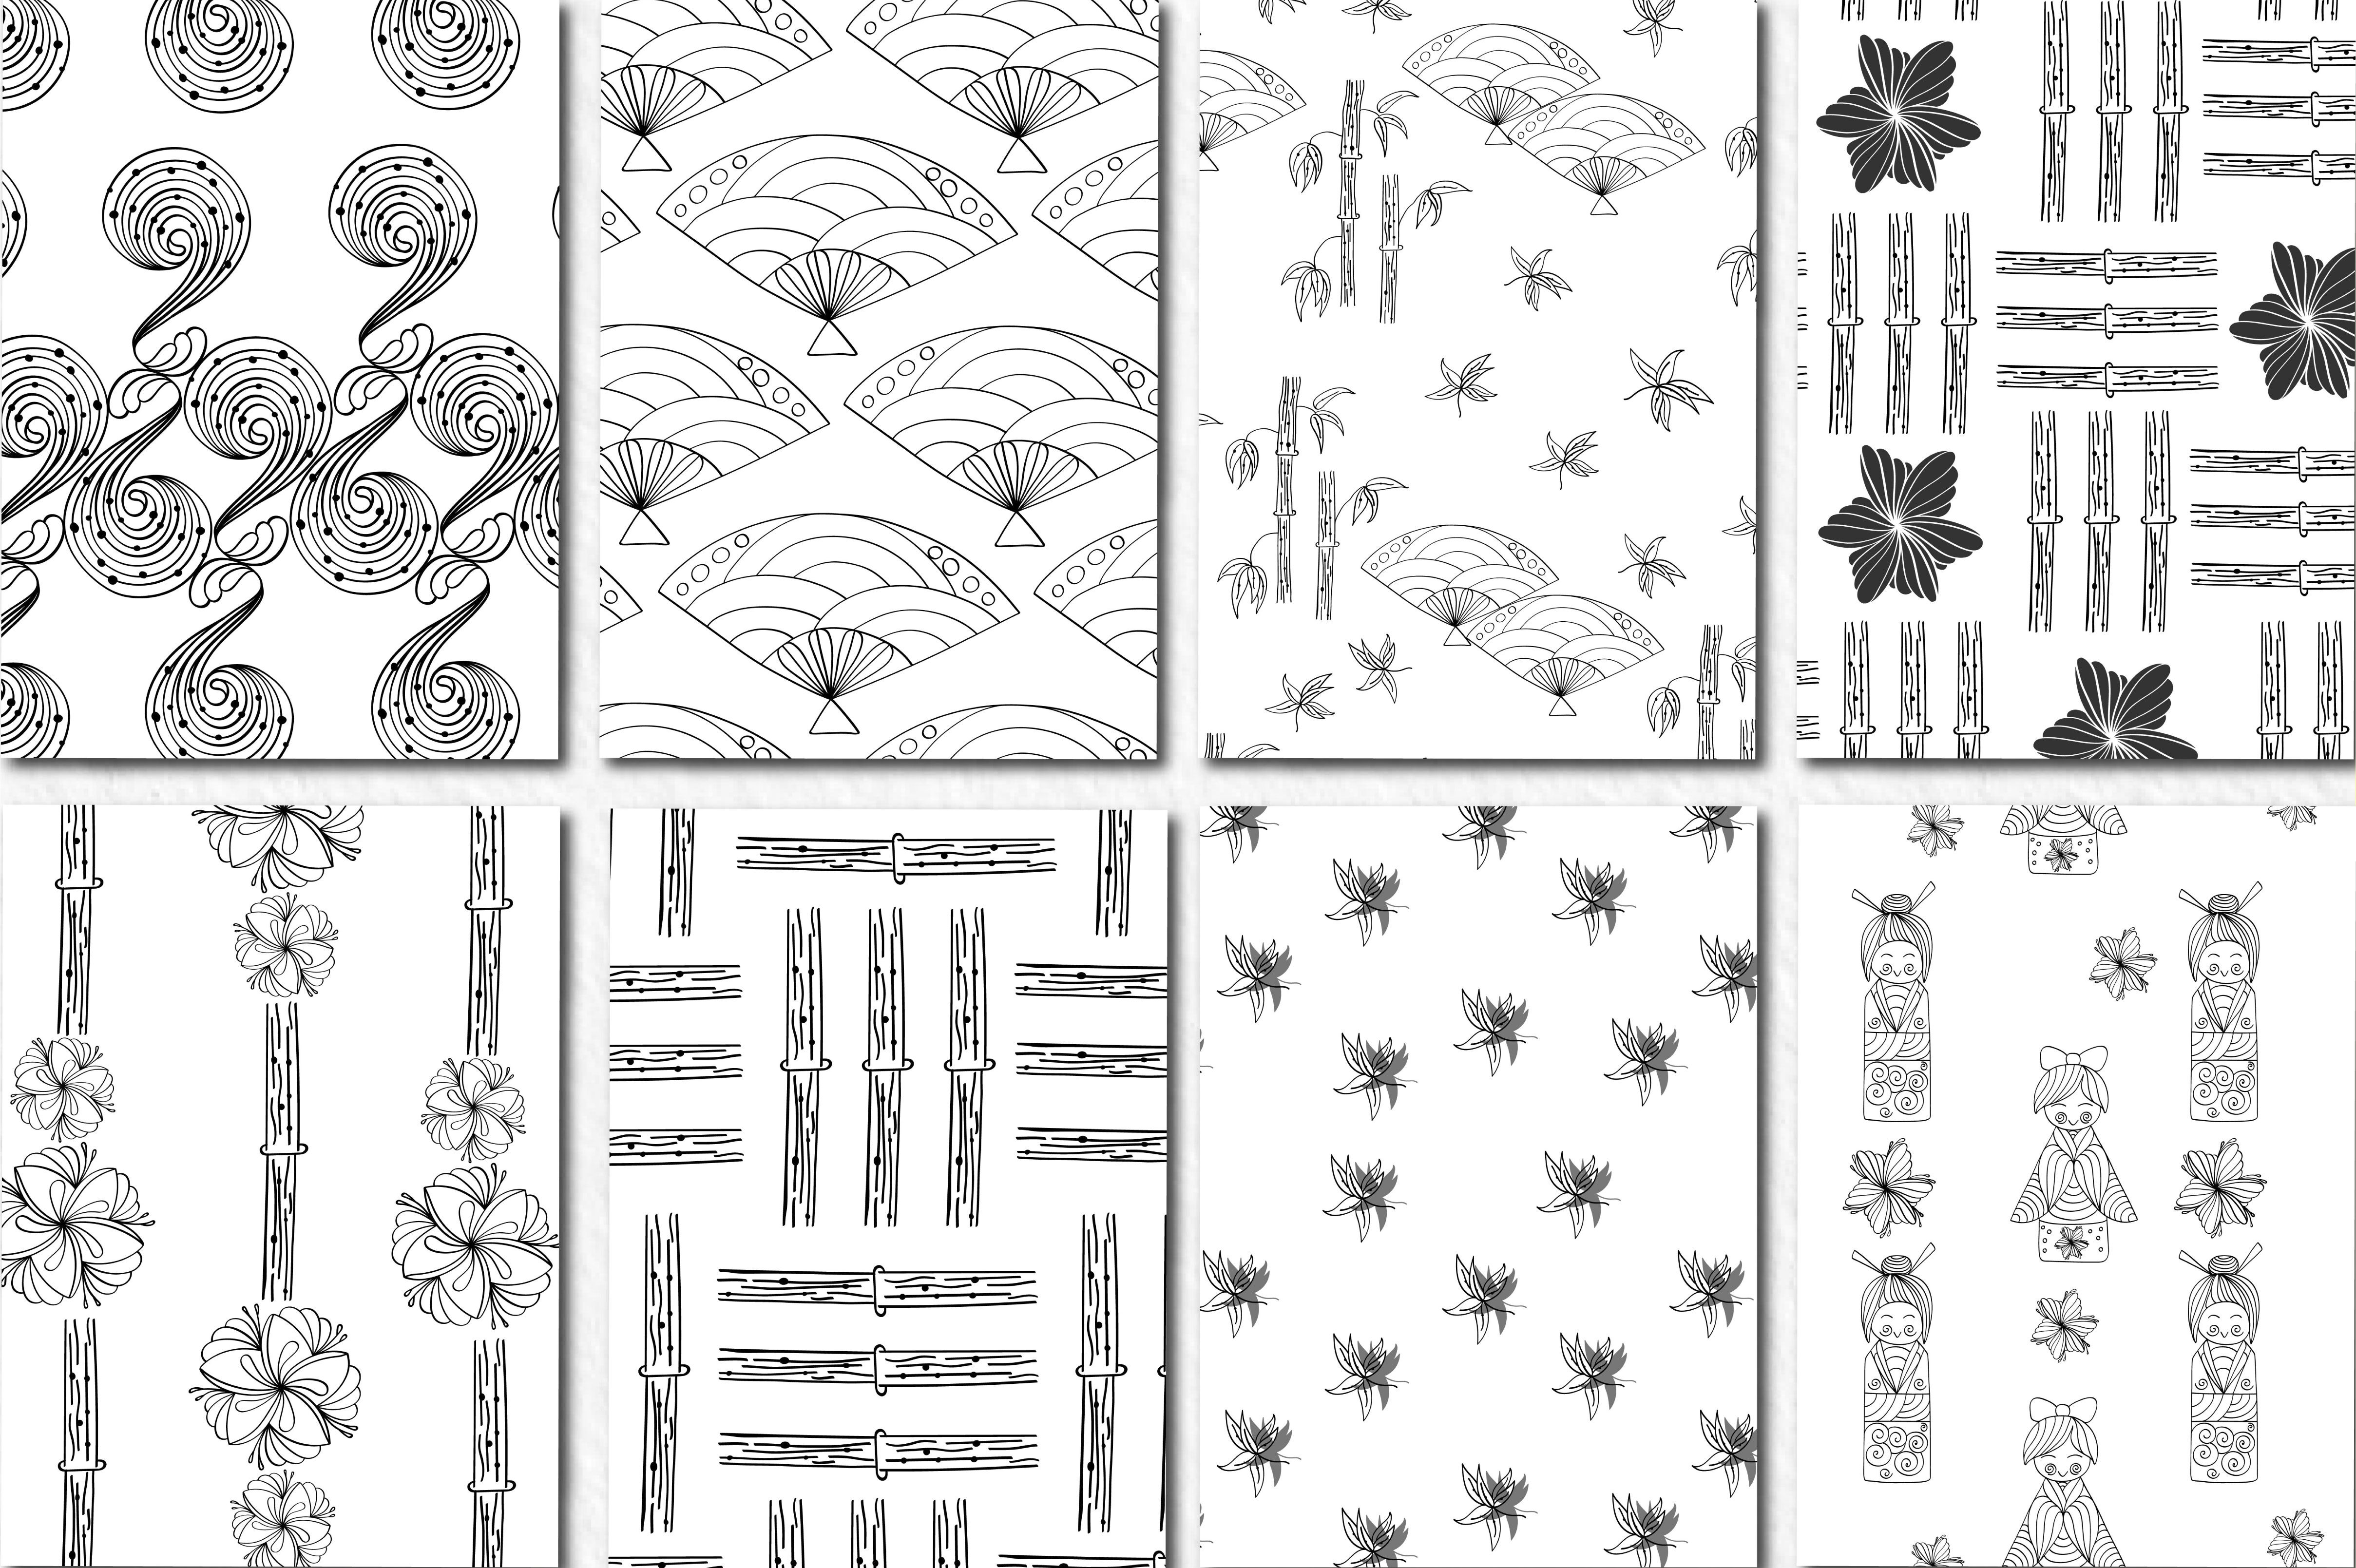 Japanese Designs And Patterns